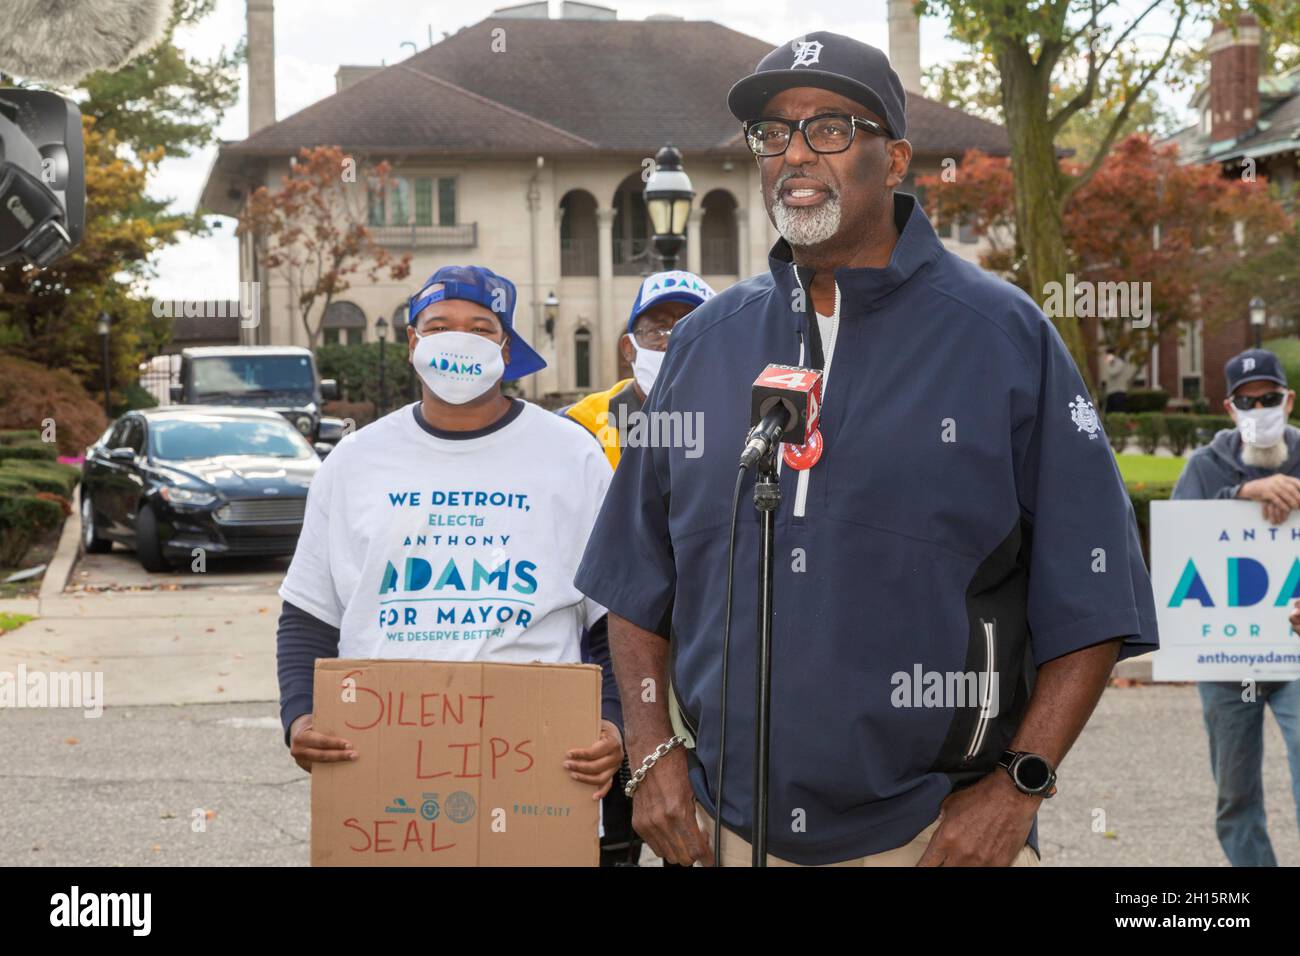 Detroit, Michigan, USA. 16th Oct, 2021. Anthony Adams, campaigning for mayor of Detroit, went to Manoogian Mansion, the mayor's residence, demanding a debate with his opponent, incumbent Mike Duggan. Duggan, a heavy favorite in November's election, has refused to debate and did not answer the door when Adams knocked. Credit: Jim West/Alamy Live News Stock Photo